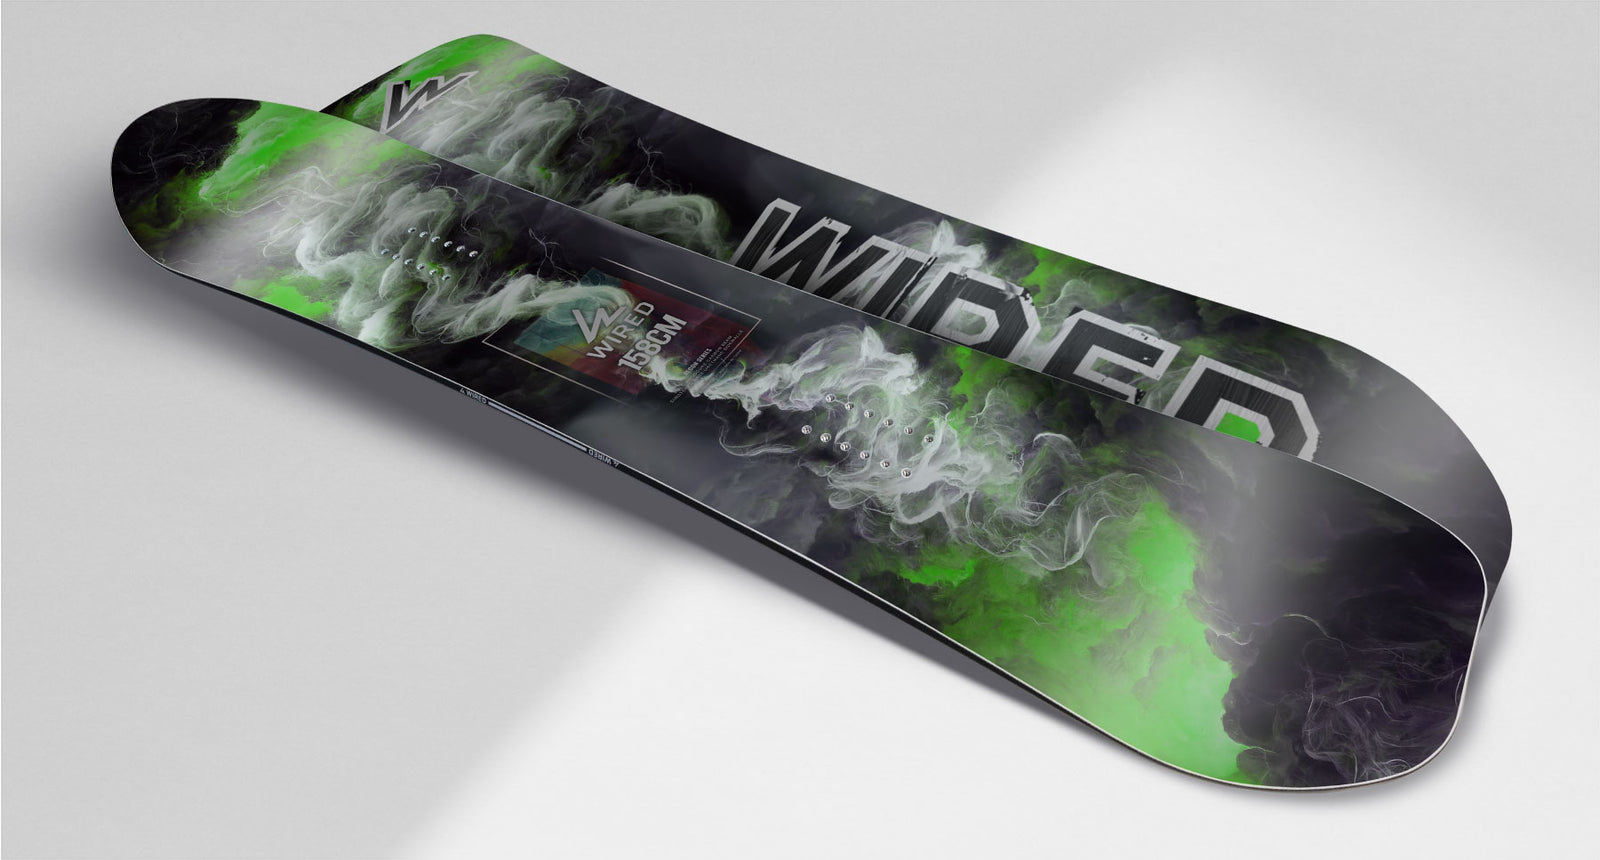 Wired Recon Series - Wired Snowboards